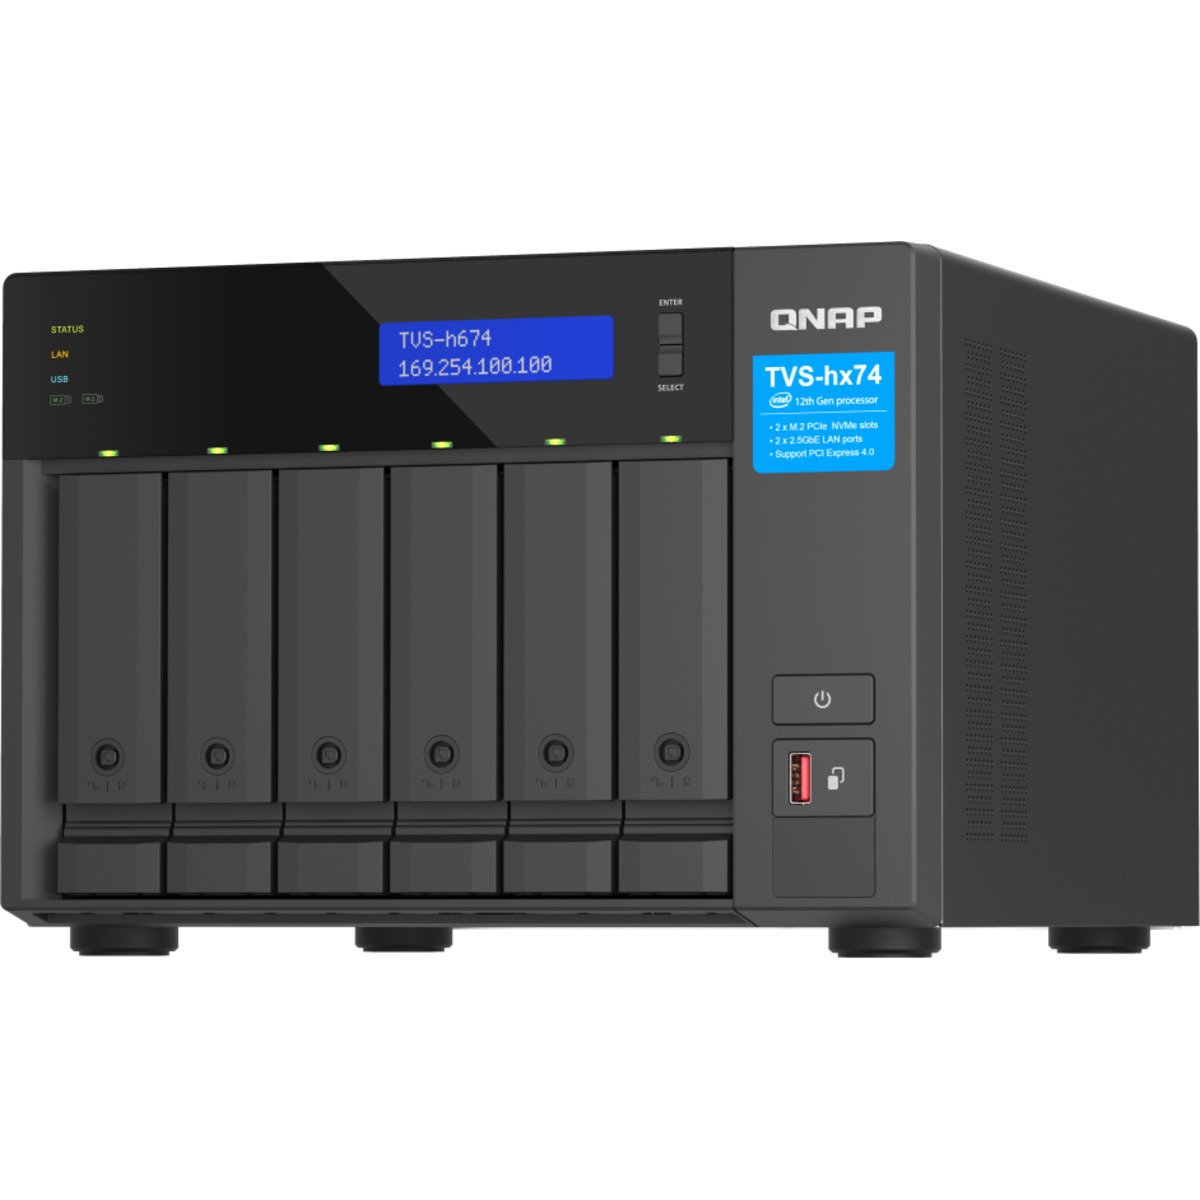 QNAP TVS-h674 Core i5 10tb 6-Bay Desktop Multimedia / Power User / Business NAS - Network Attached Storage Device 5x2tb Western Digital Red Plus WD20EFZX 3.5 5400rpm SATA 6Gb/s HDD NAS Class Drives Installed - Burn-In Tested TVS-h674 Core i5